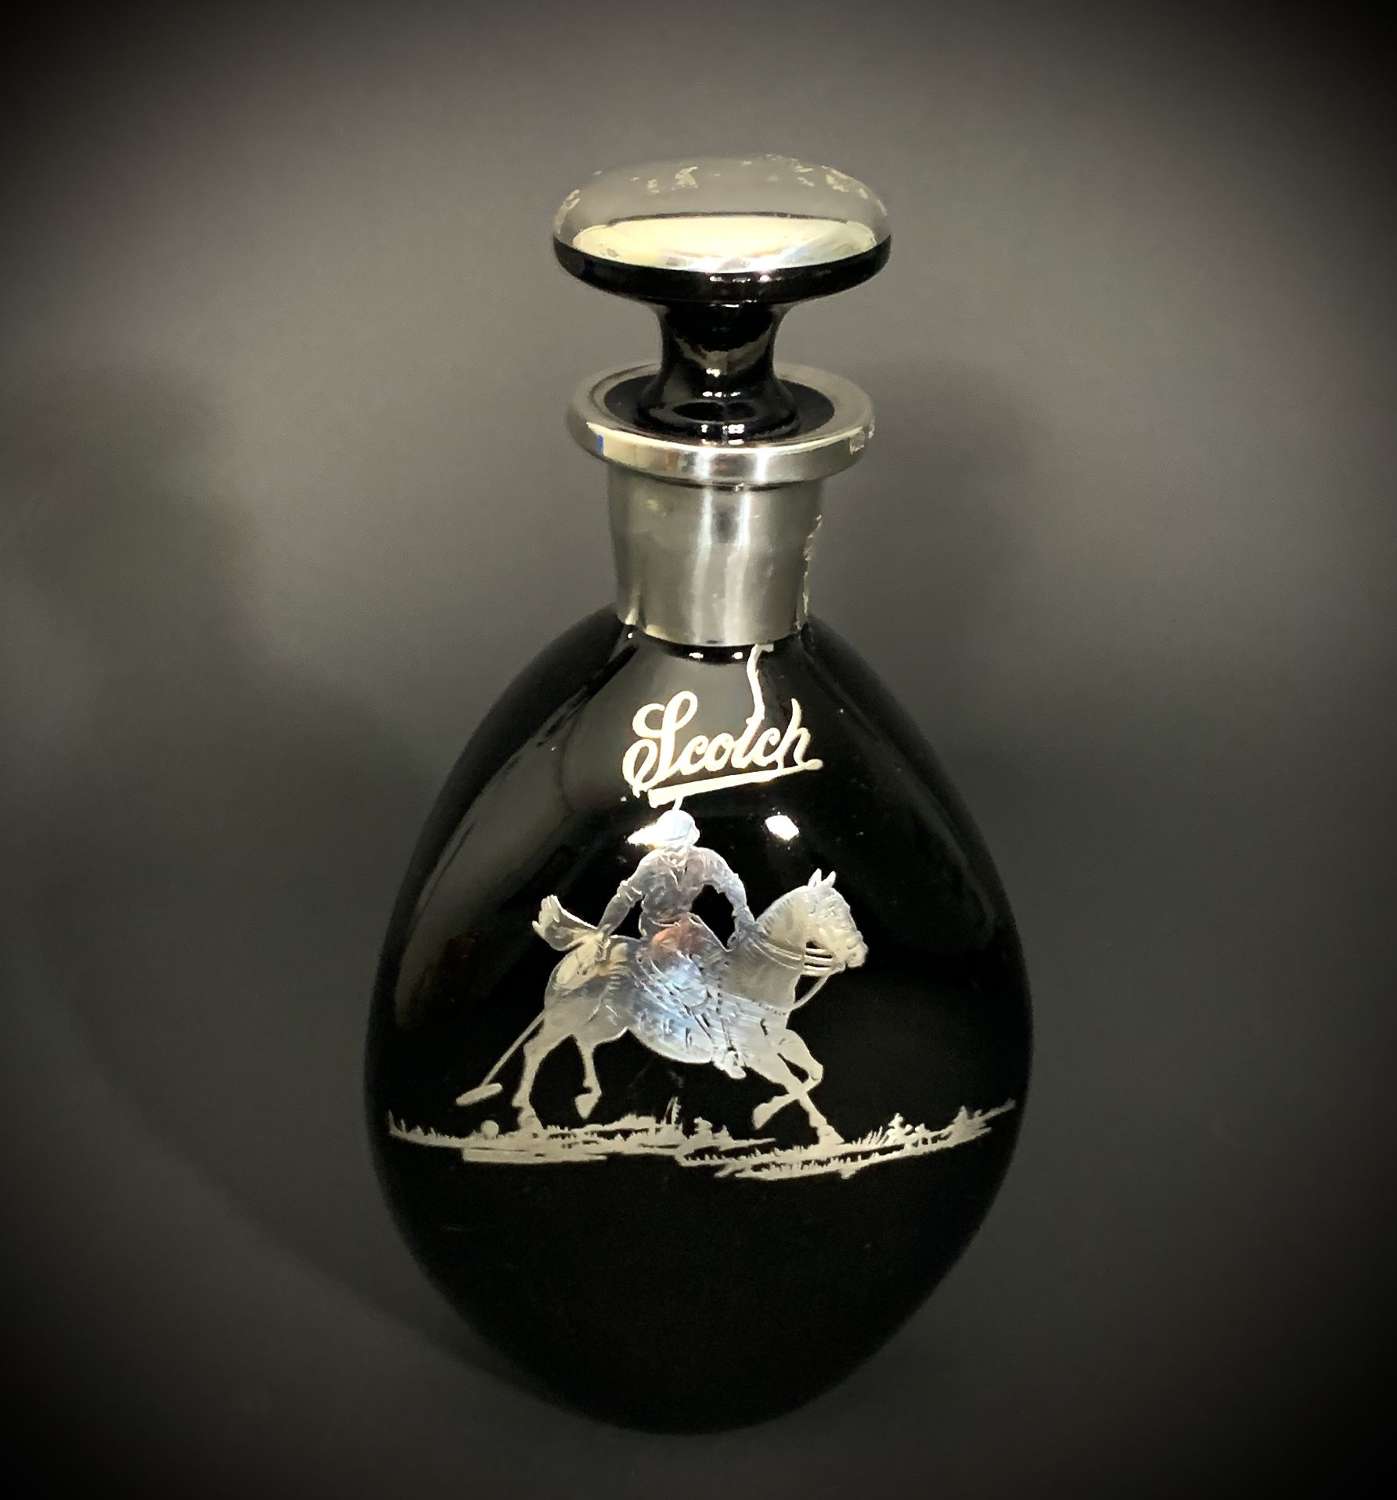 An obsidian glass & inlaid silver decanter depicting a Polo player